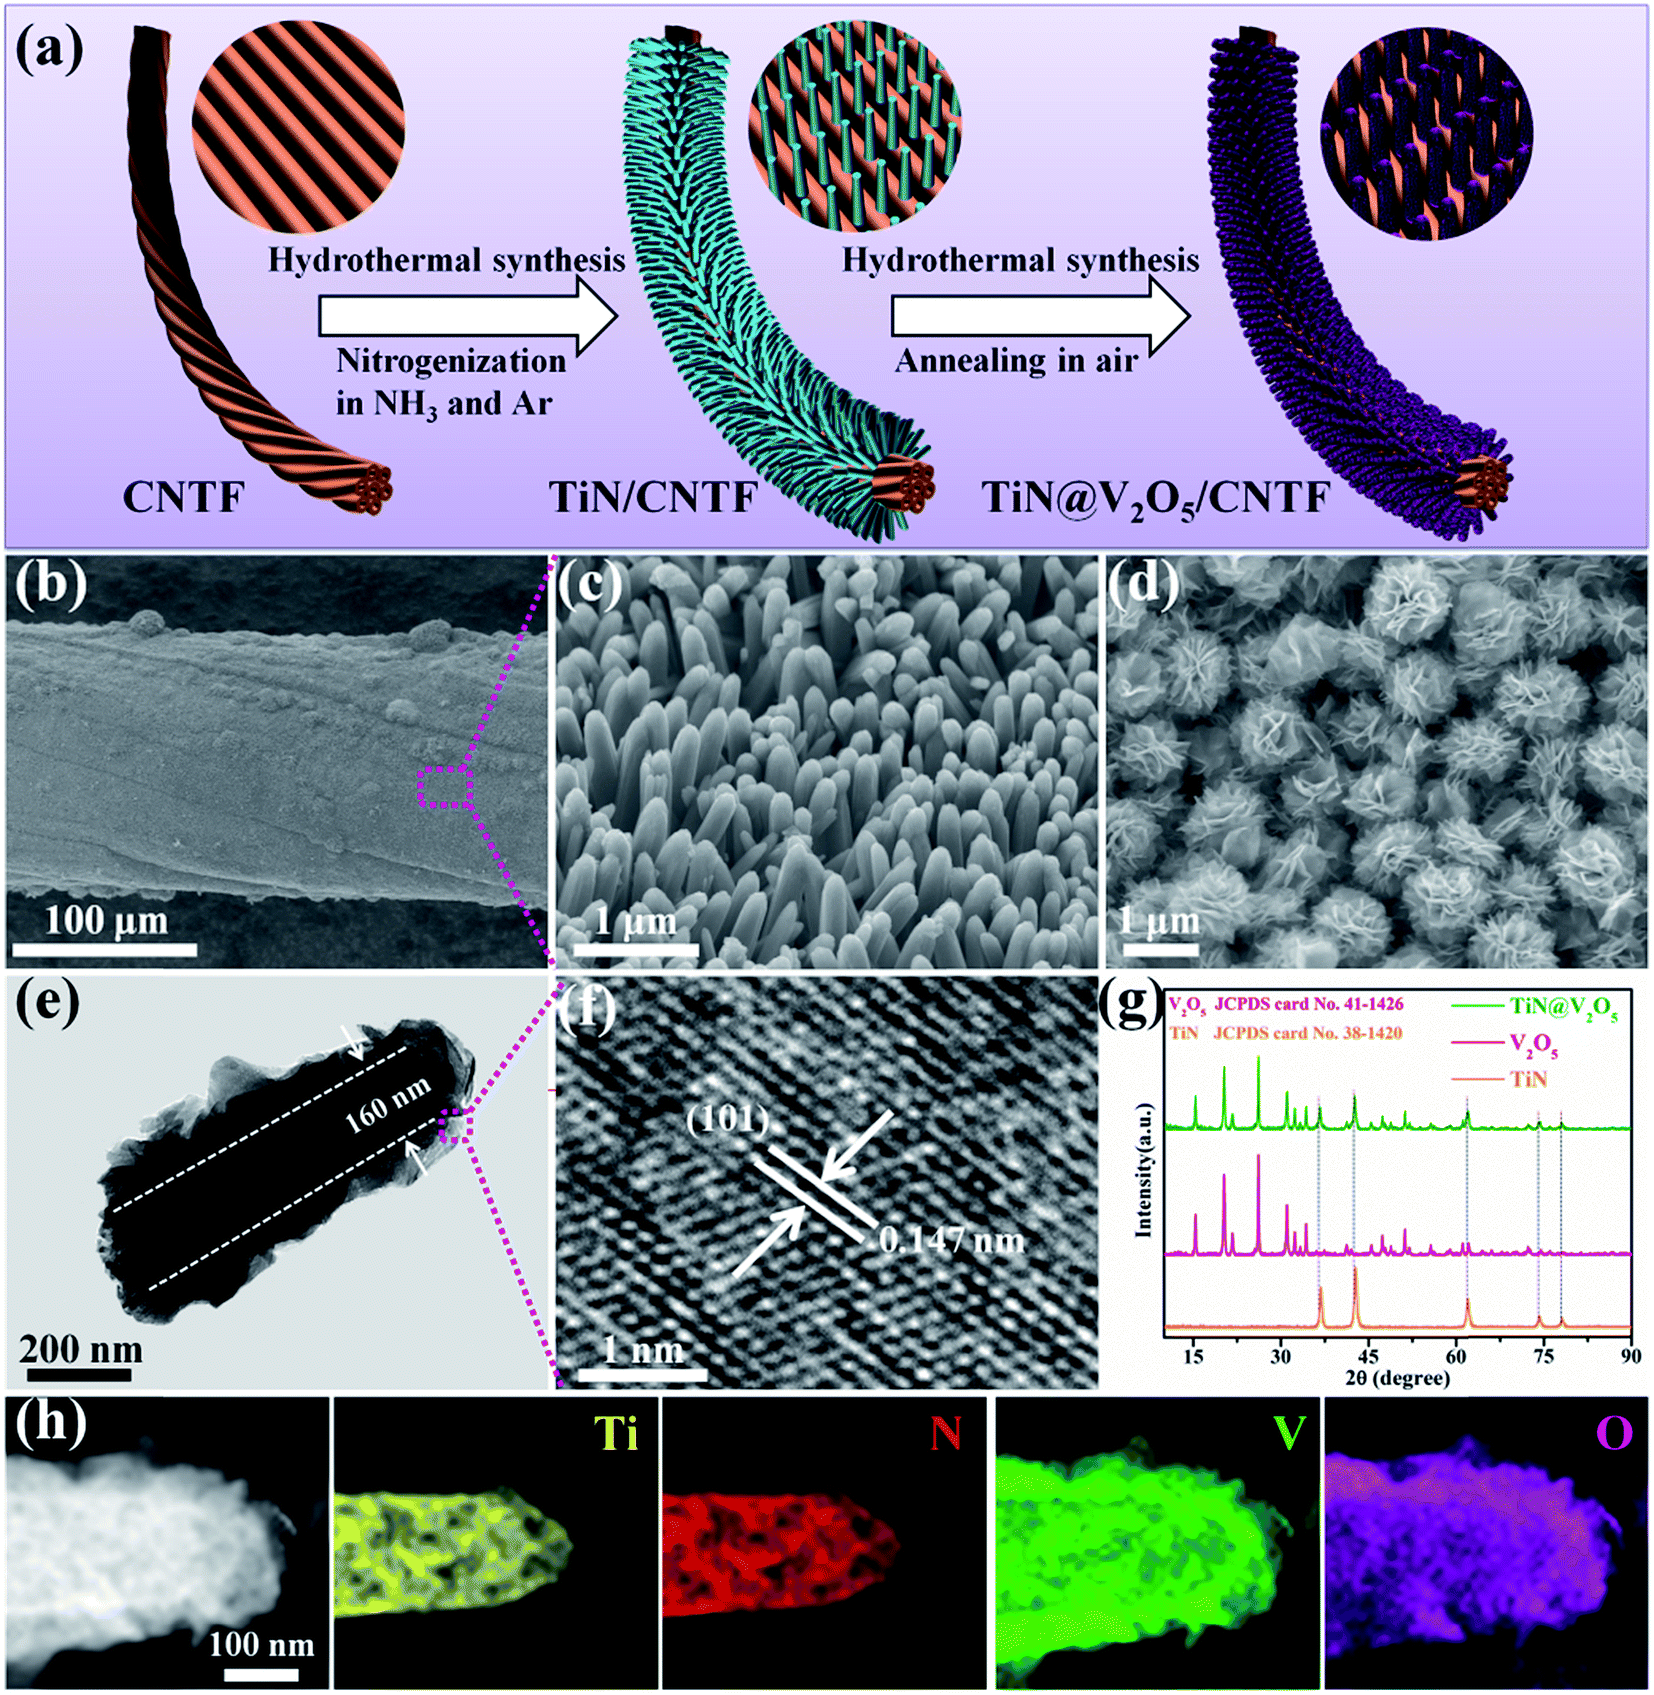 Anchoring V2o5 Nanosheets On Hierarchical Titanium Nitride Nanowire Arrays To Form Core Shell Heterostructures As A Superior Cathode For High Performance Wearable Aqueous Rechargeable Zinc Ion Batteries Journal Of Materials Chemistry A Rsc Publishing